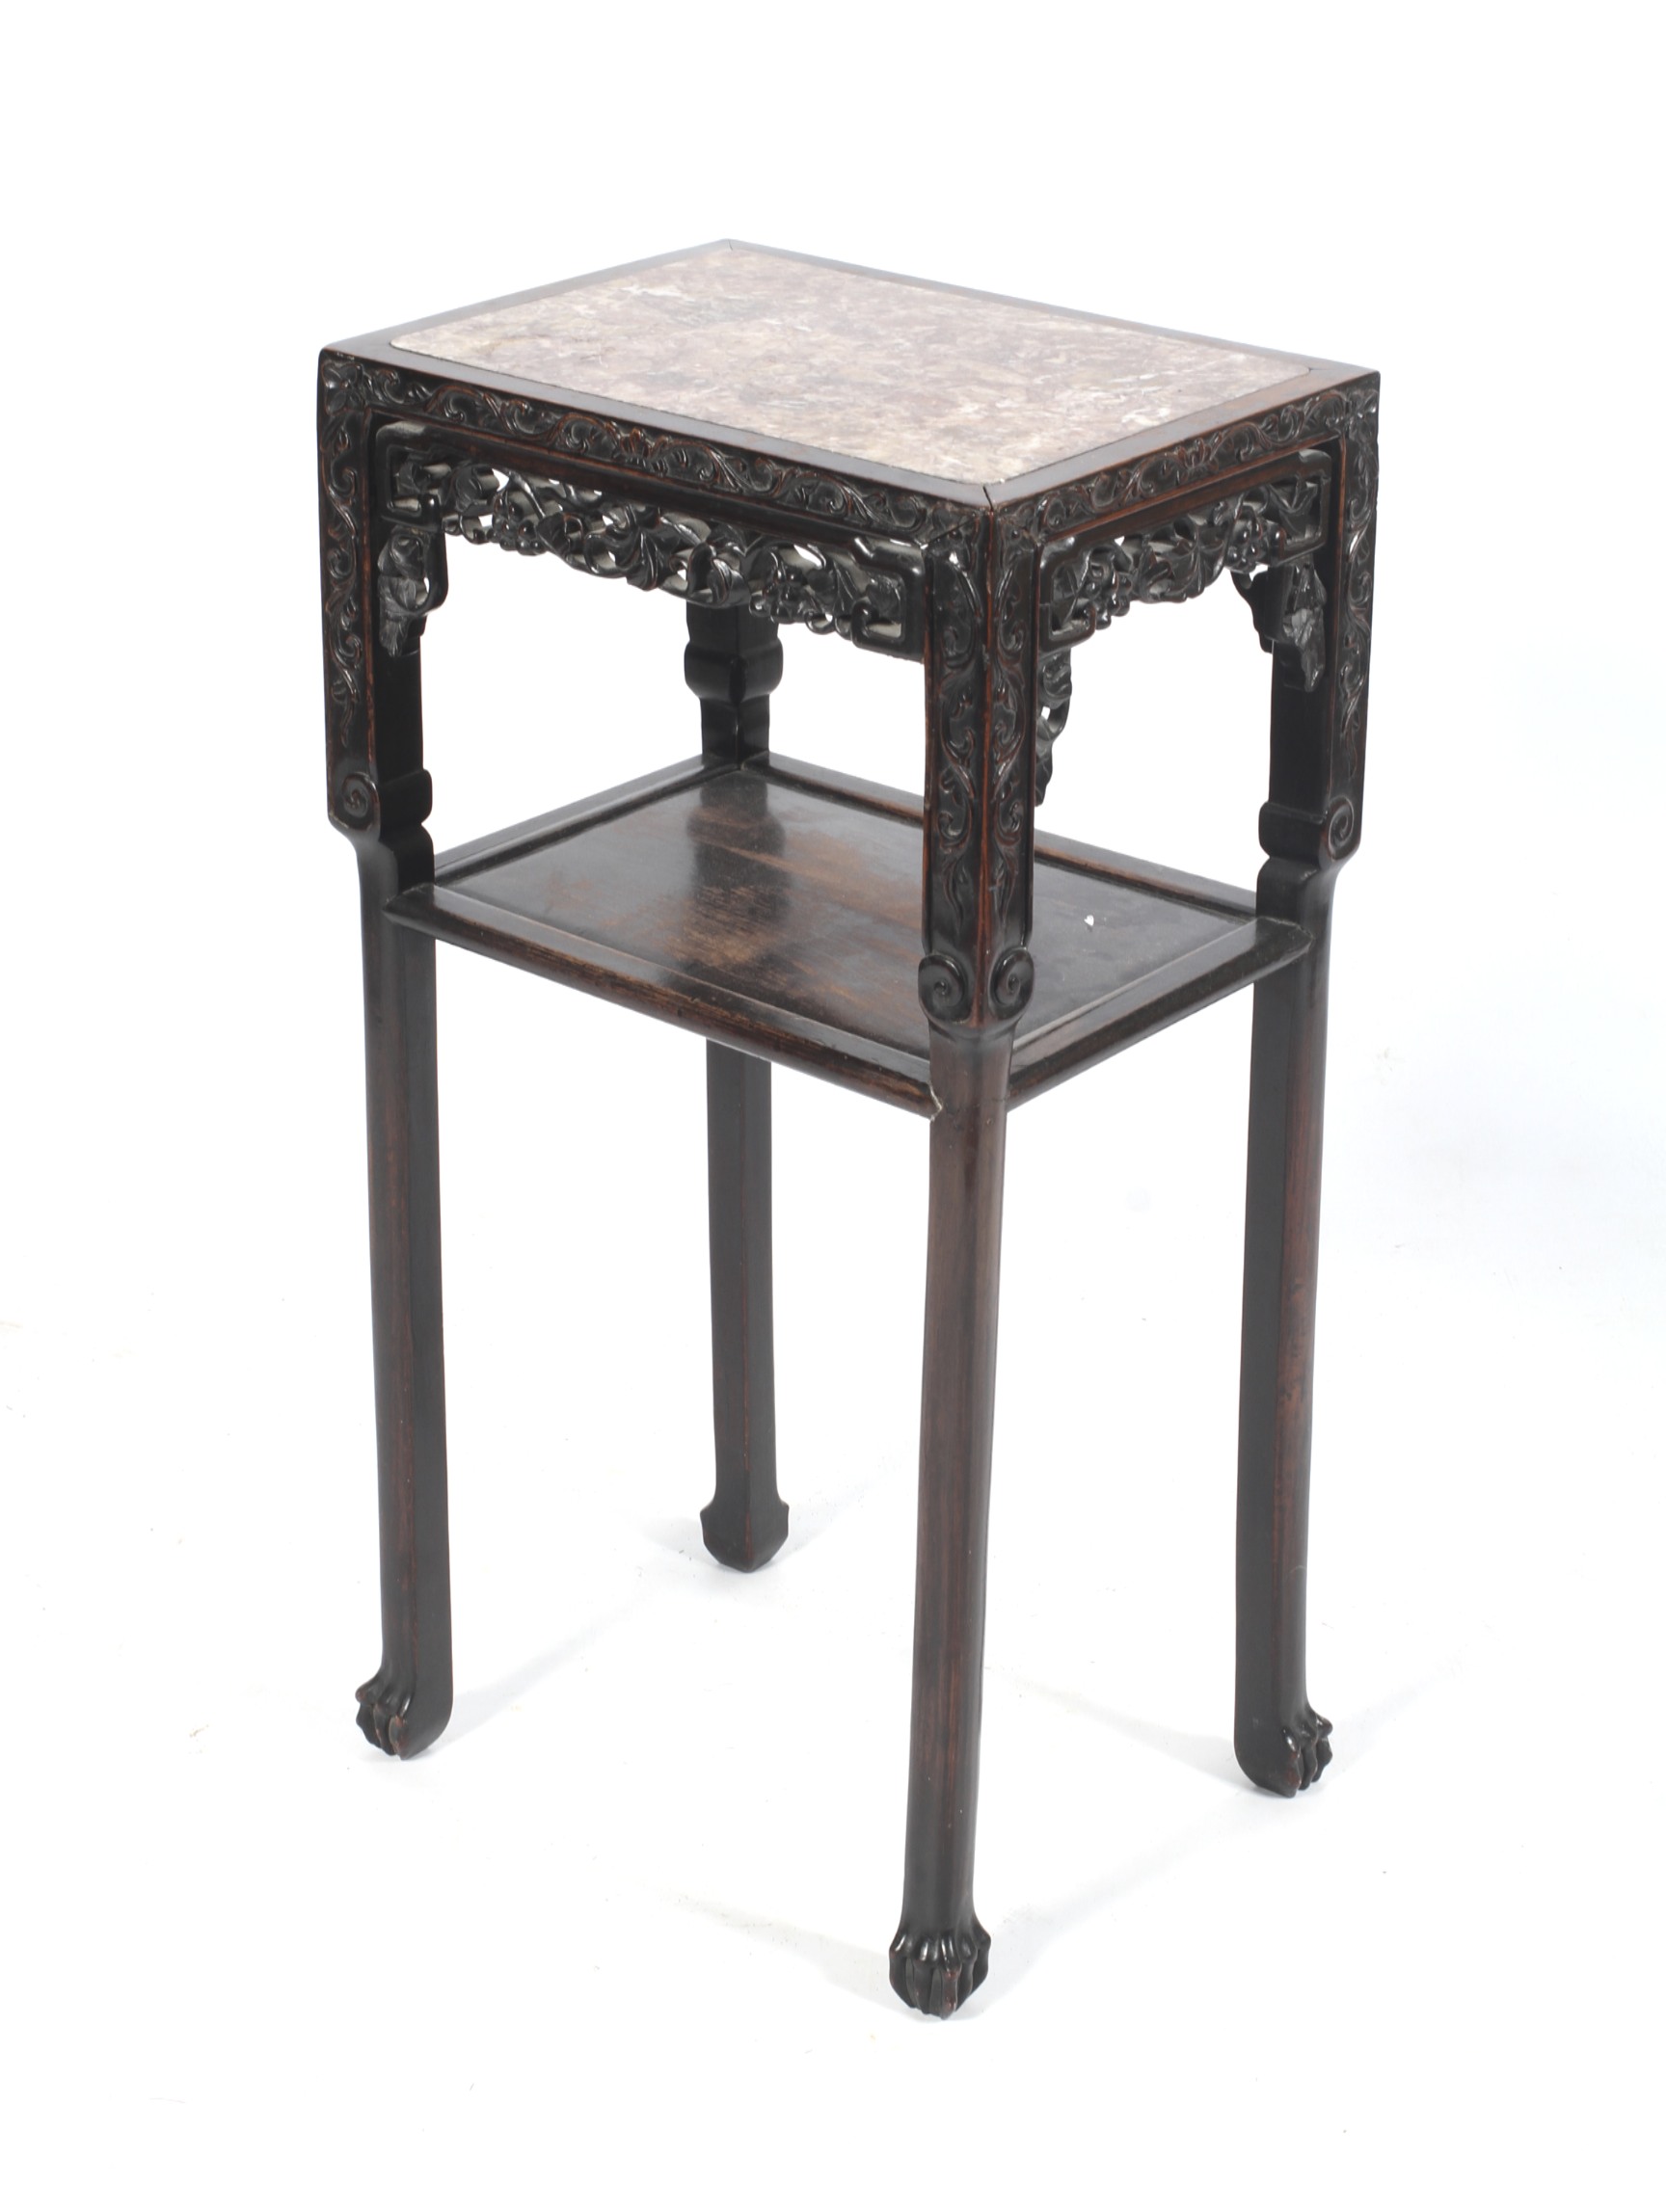 A 19th century Chinese hardwood Rouge marble topped two tiered side table,